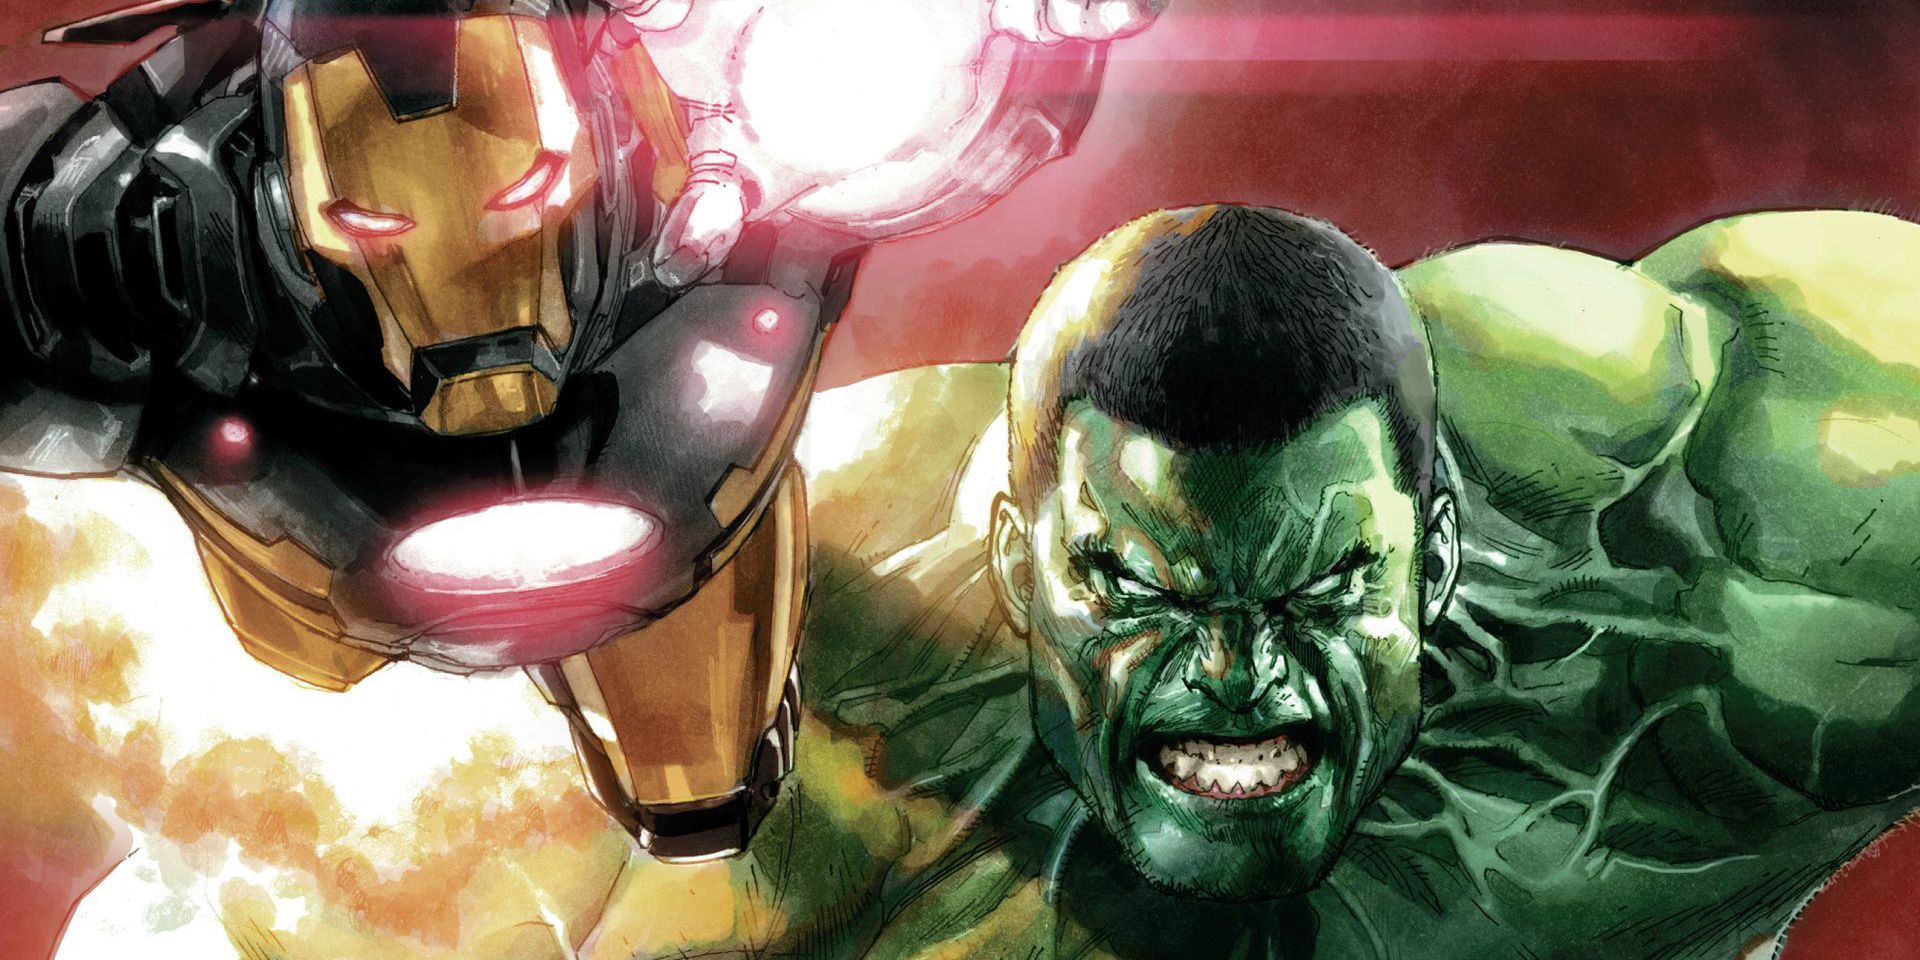 The Hulk chases down Iron Man in Marvel Comics